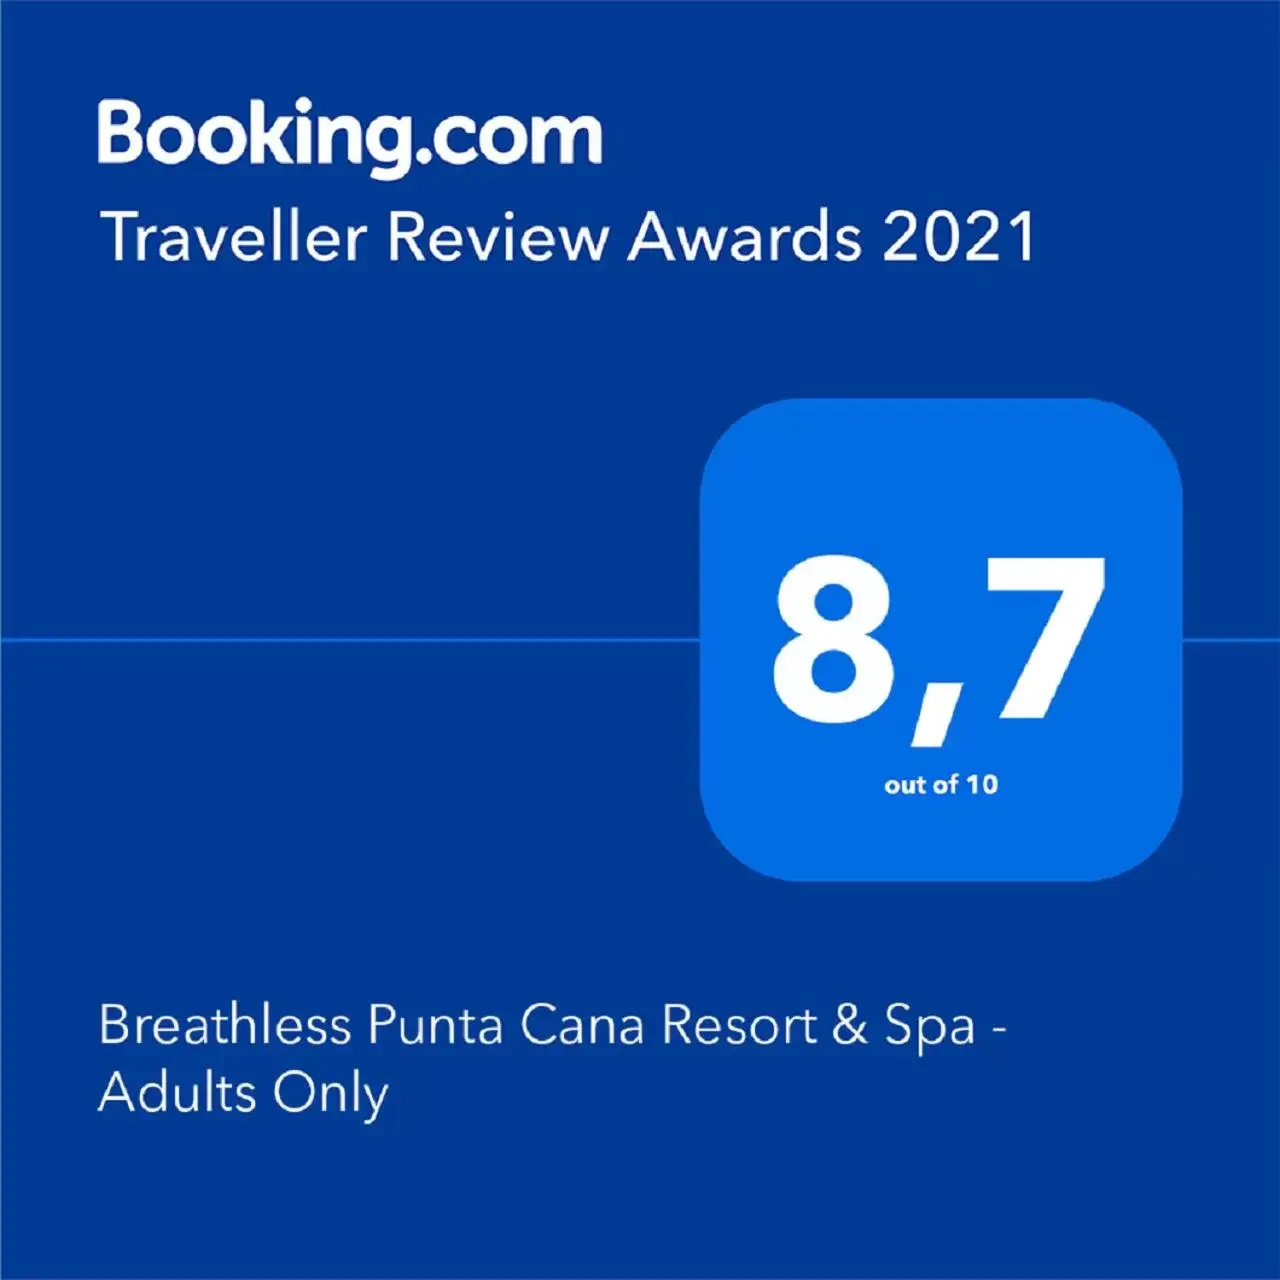 Certificate/Award, Logo/Certificate/Sign/Award in Breathless Punta Cana Resort & Spa - Adults Only